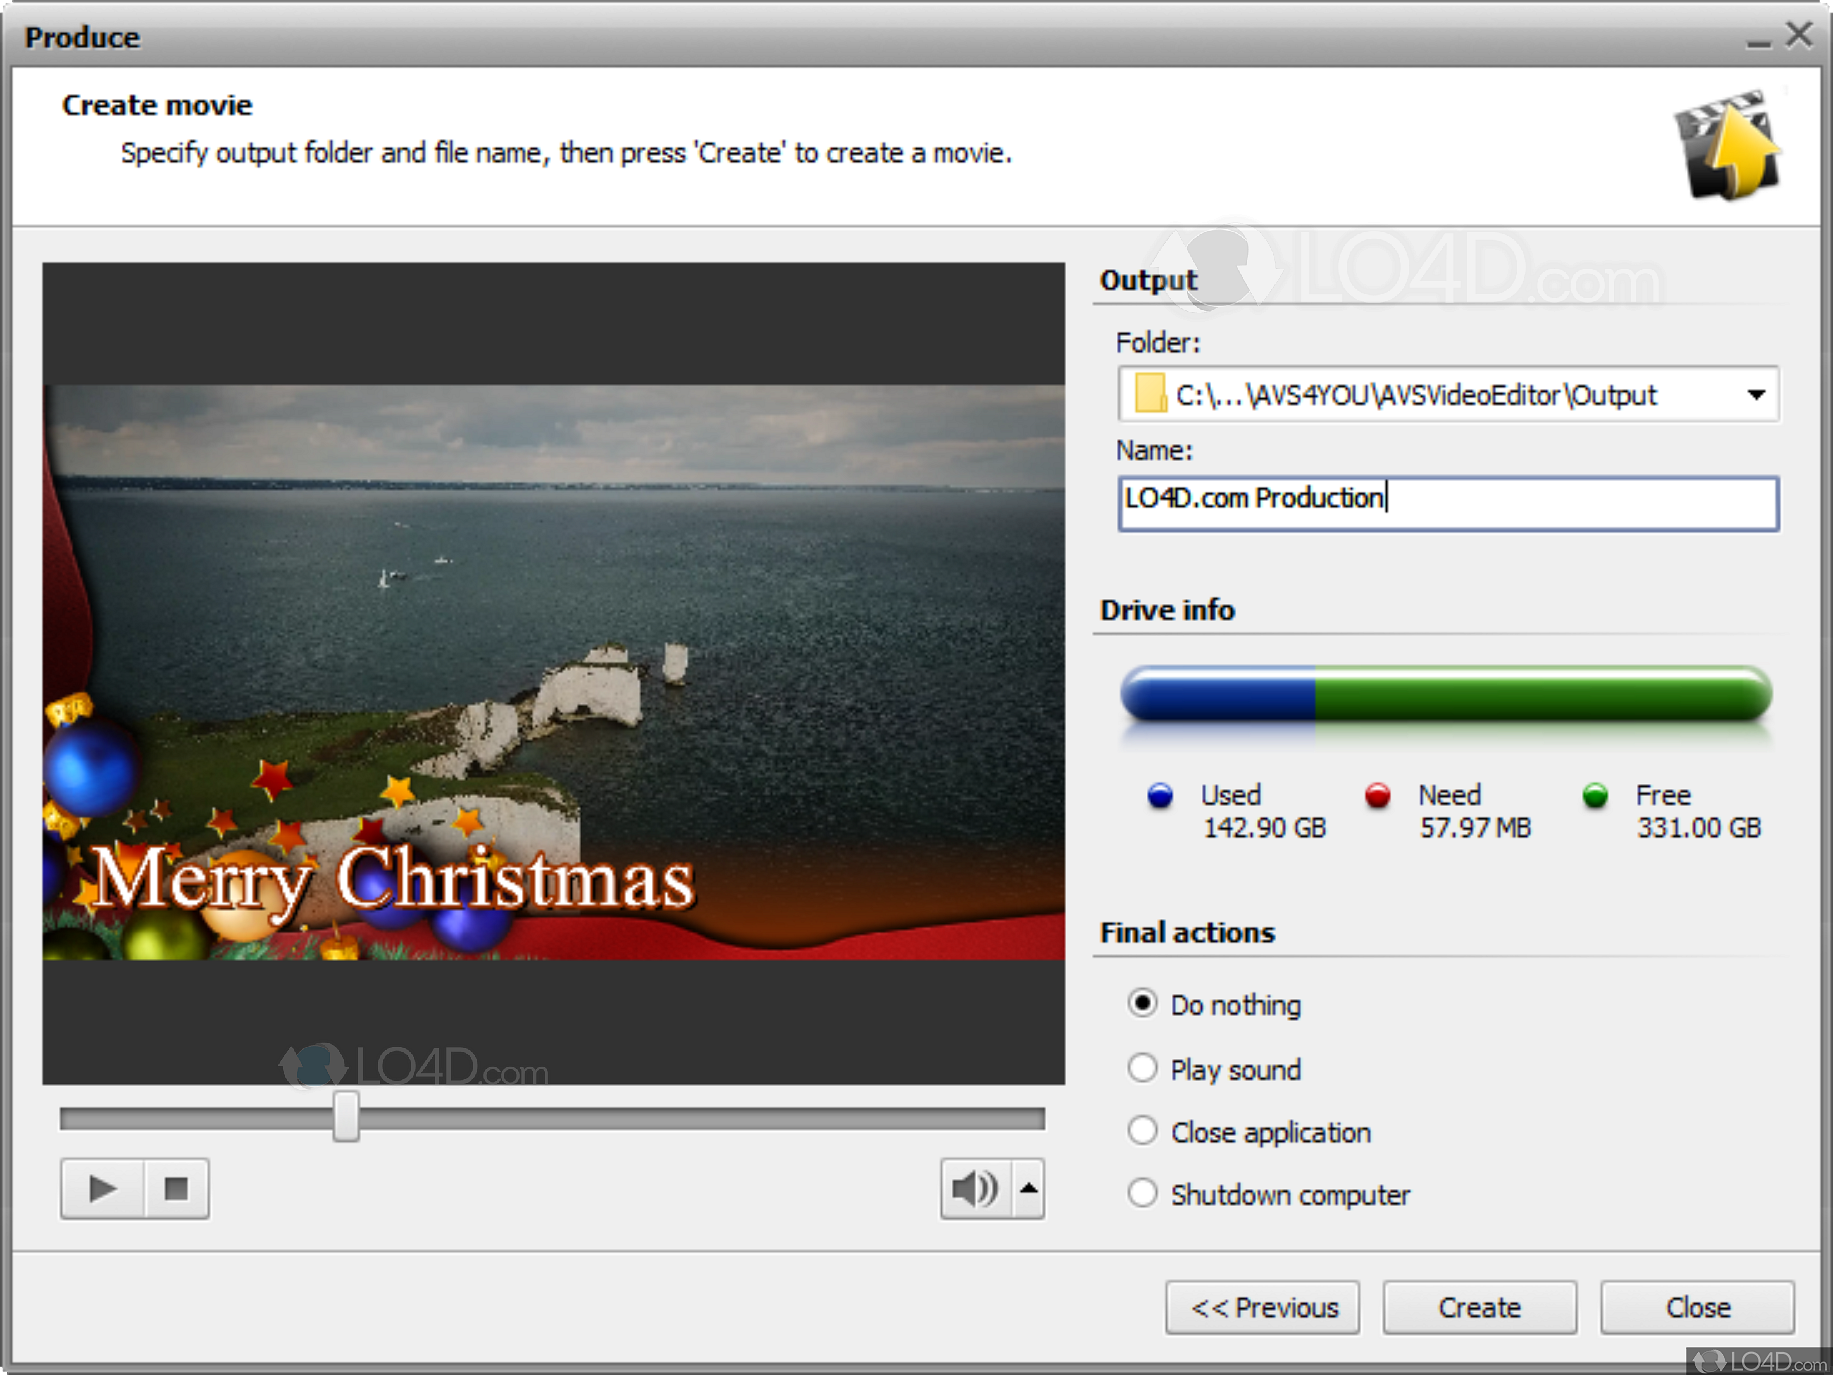 how toscreenshot film video on avs video editor software